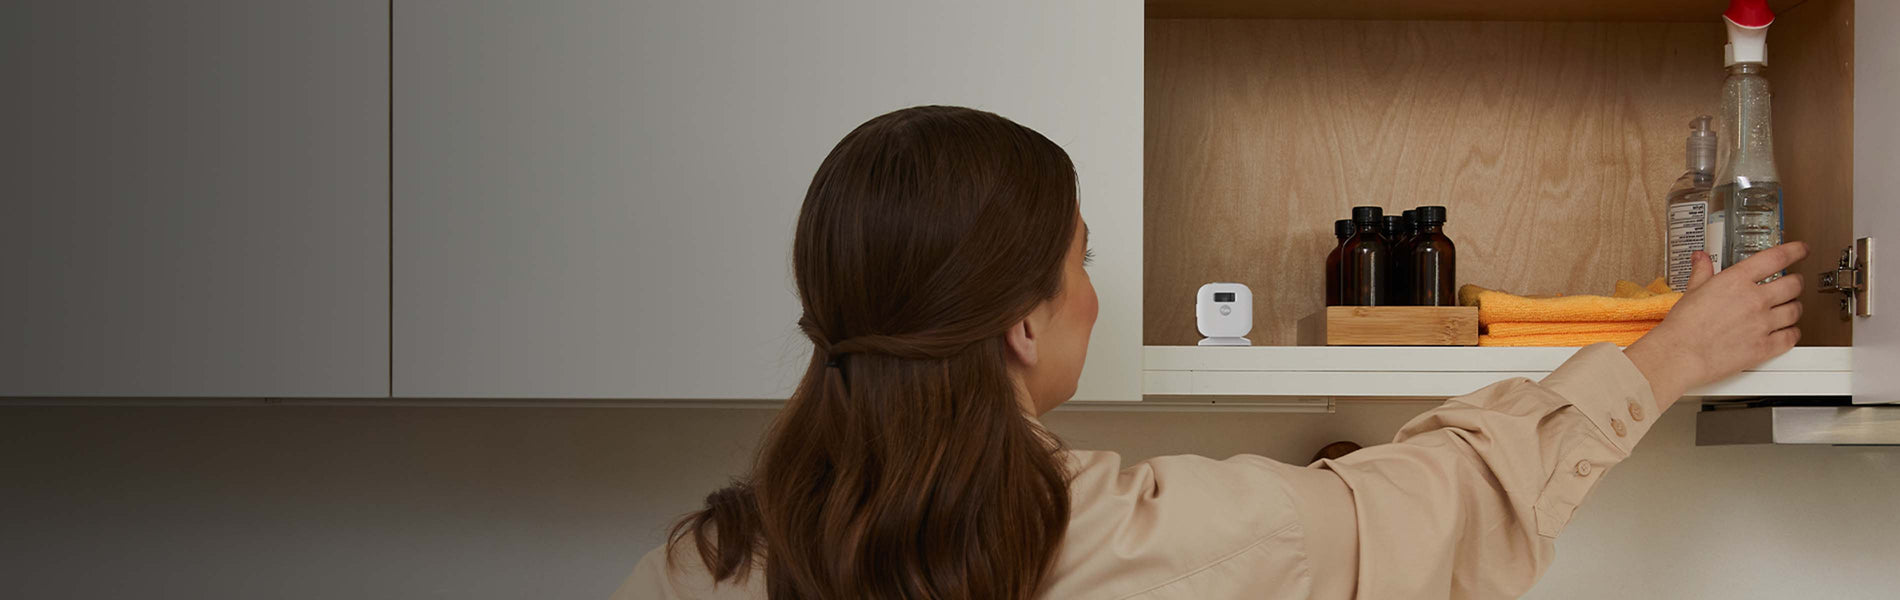 Secure cabinet with cleaner inside and simple installation with Yale Smart locks